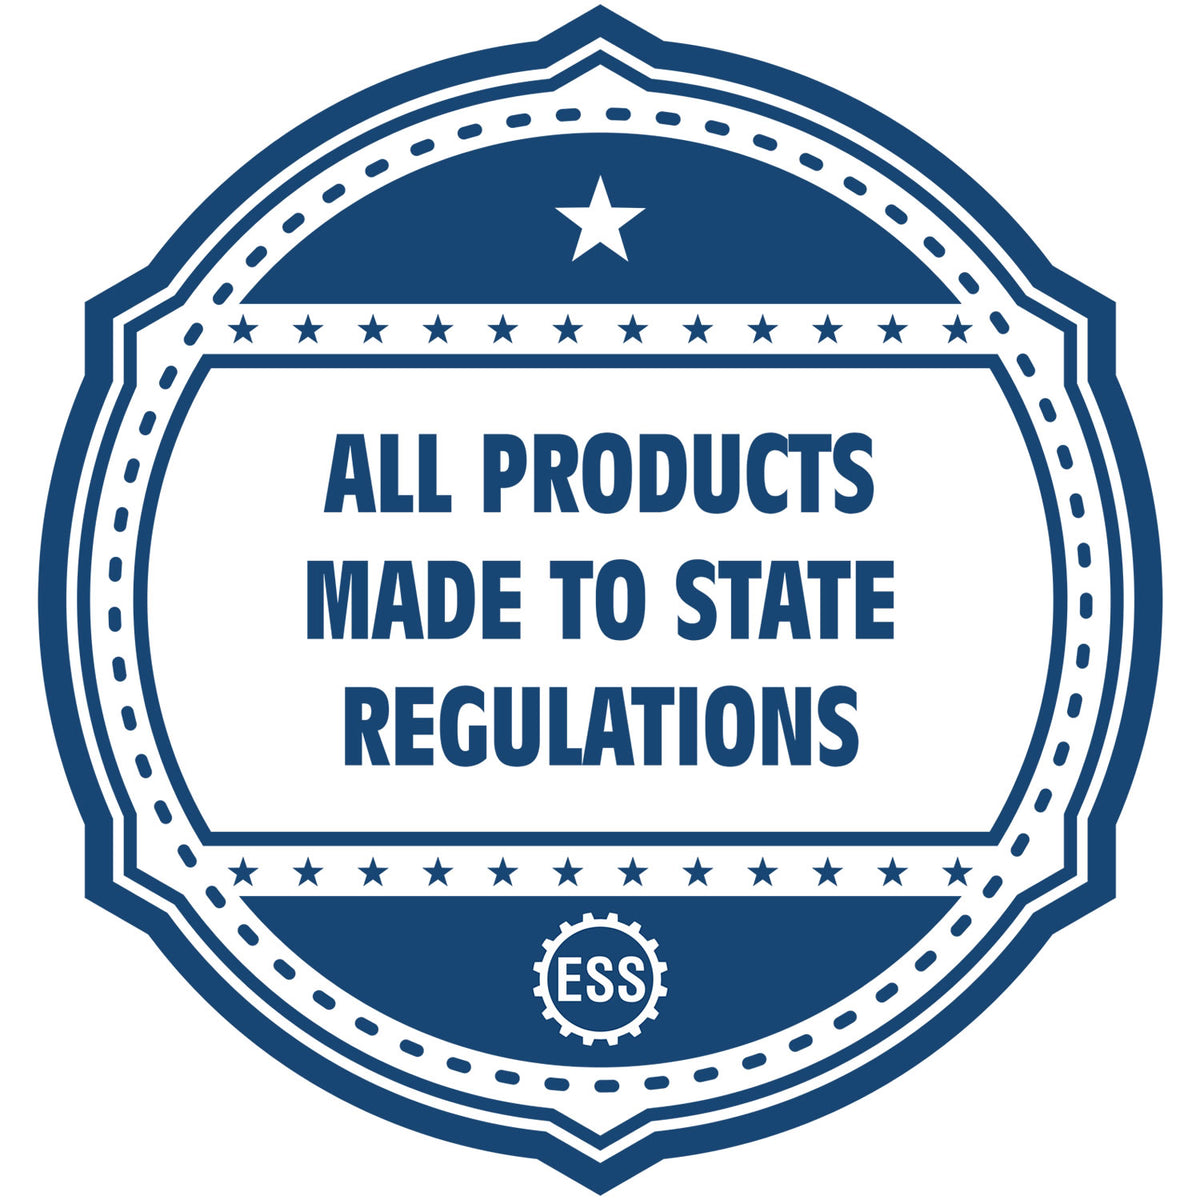 An icon or badge element for the State of Iowa Extended Long Reach Engineer Seal showing that this product is made in compliance with state regulations.